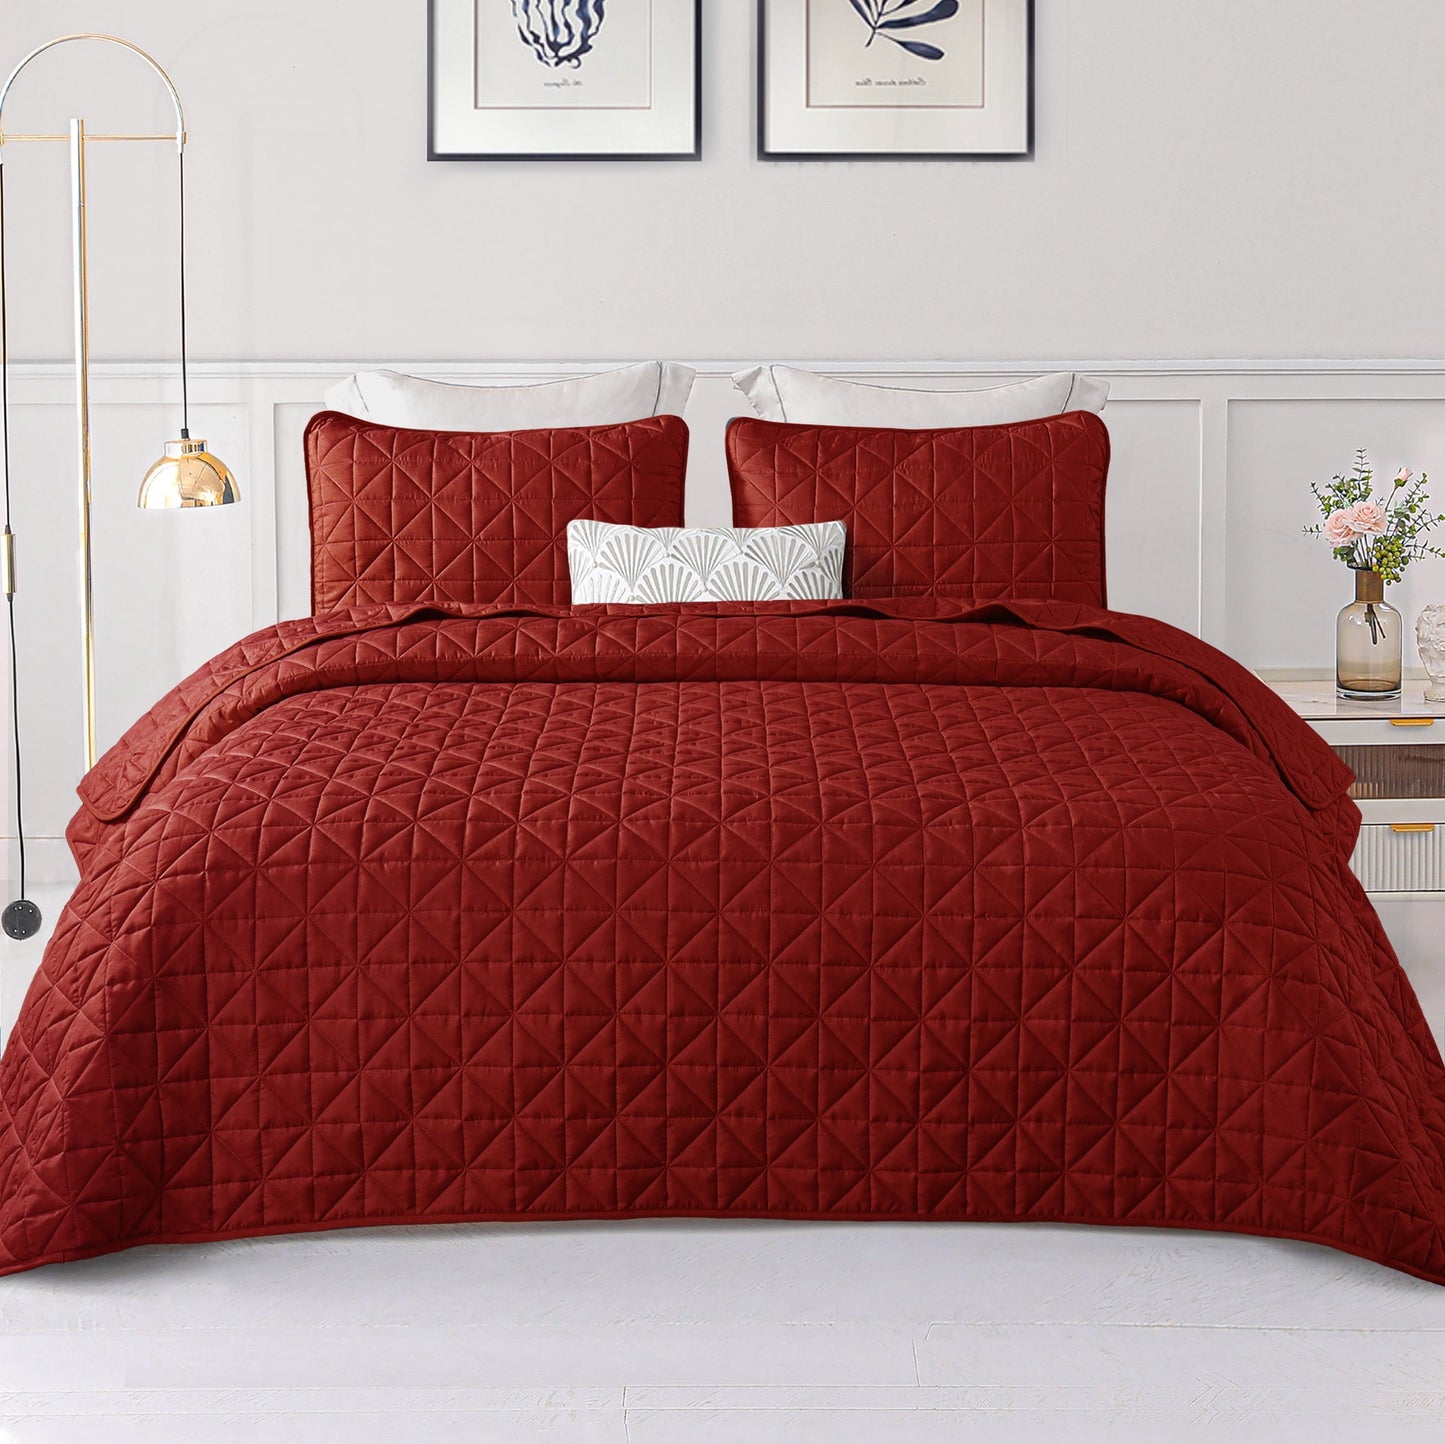 Exclusivo Mezcla Twin Quilt Bedding Set for All Seasons, Lightweight Soft Red Quilts Twin Size Bedspreads Coverlets Bed Cover with Geometric Stitched Pattern, (1 Quilt, 1 Pillow Sham)